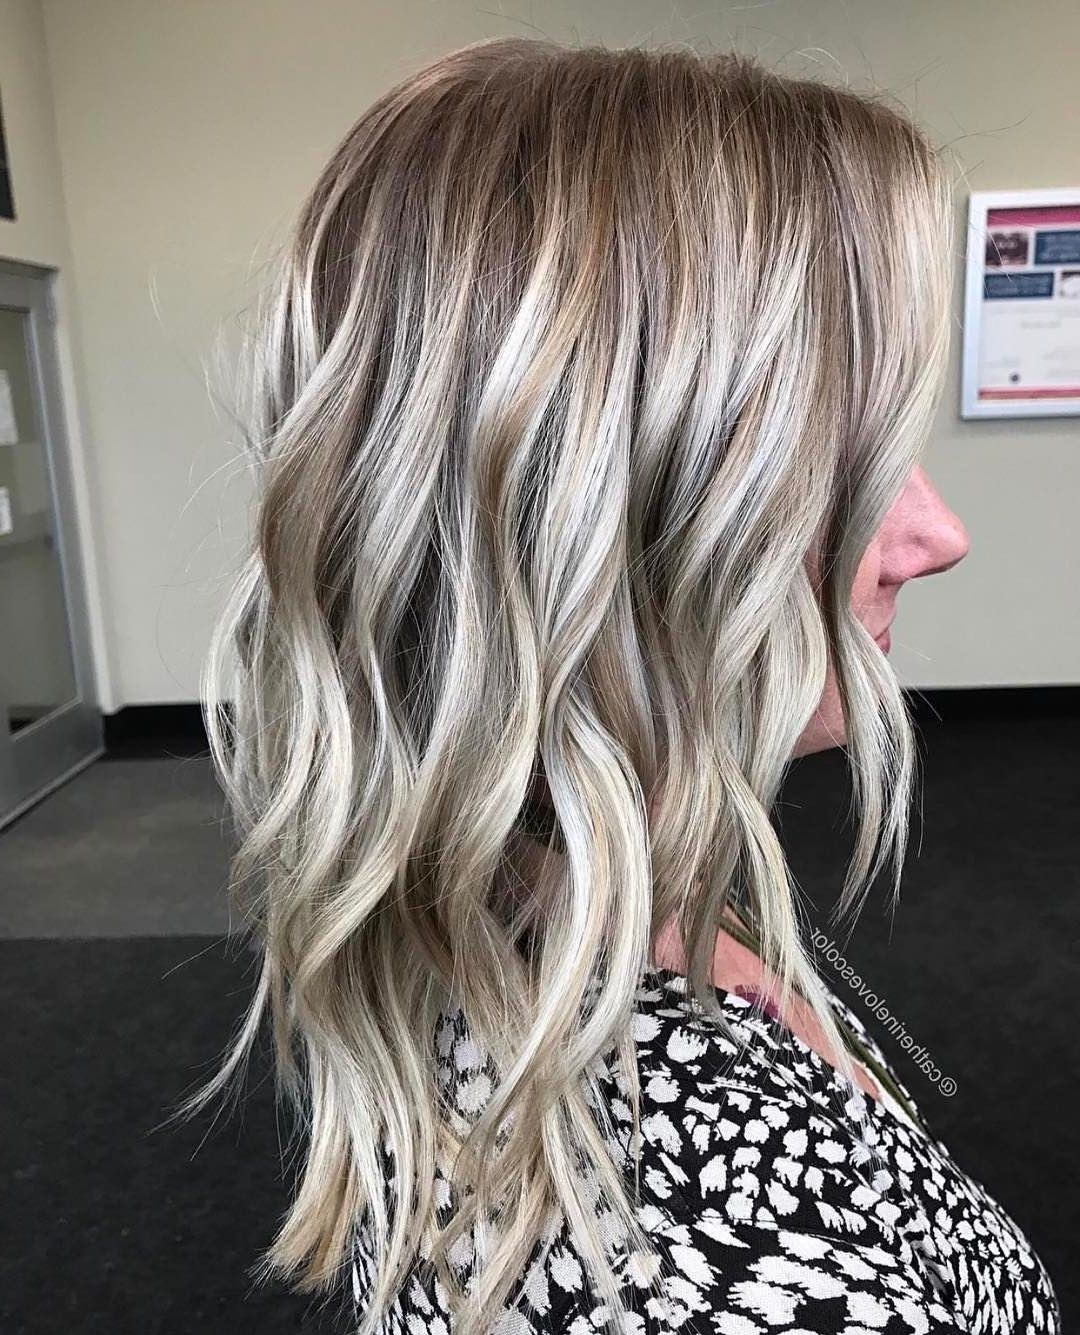 20 Adorable Ash Blonde Hairstyles To Try: Hair Color Ideas 2018 Pertaining To Most Popular Platinum Highlights Blonde Hairstyles (View 11 of 20)